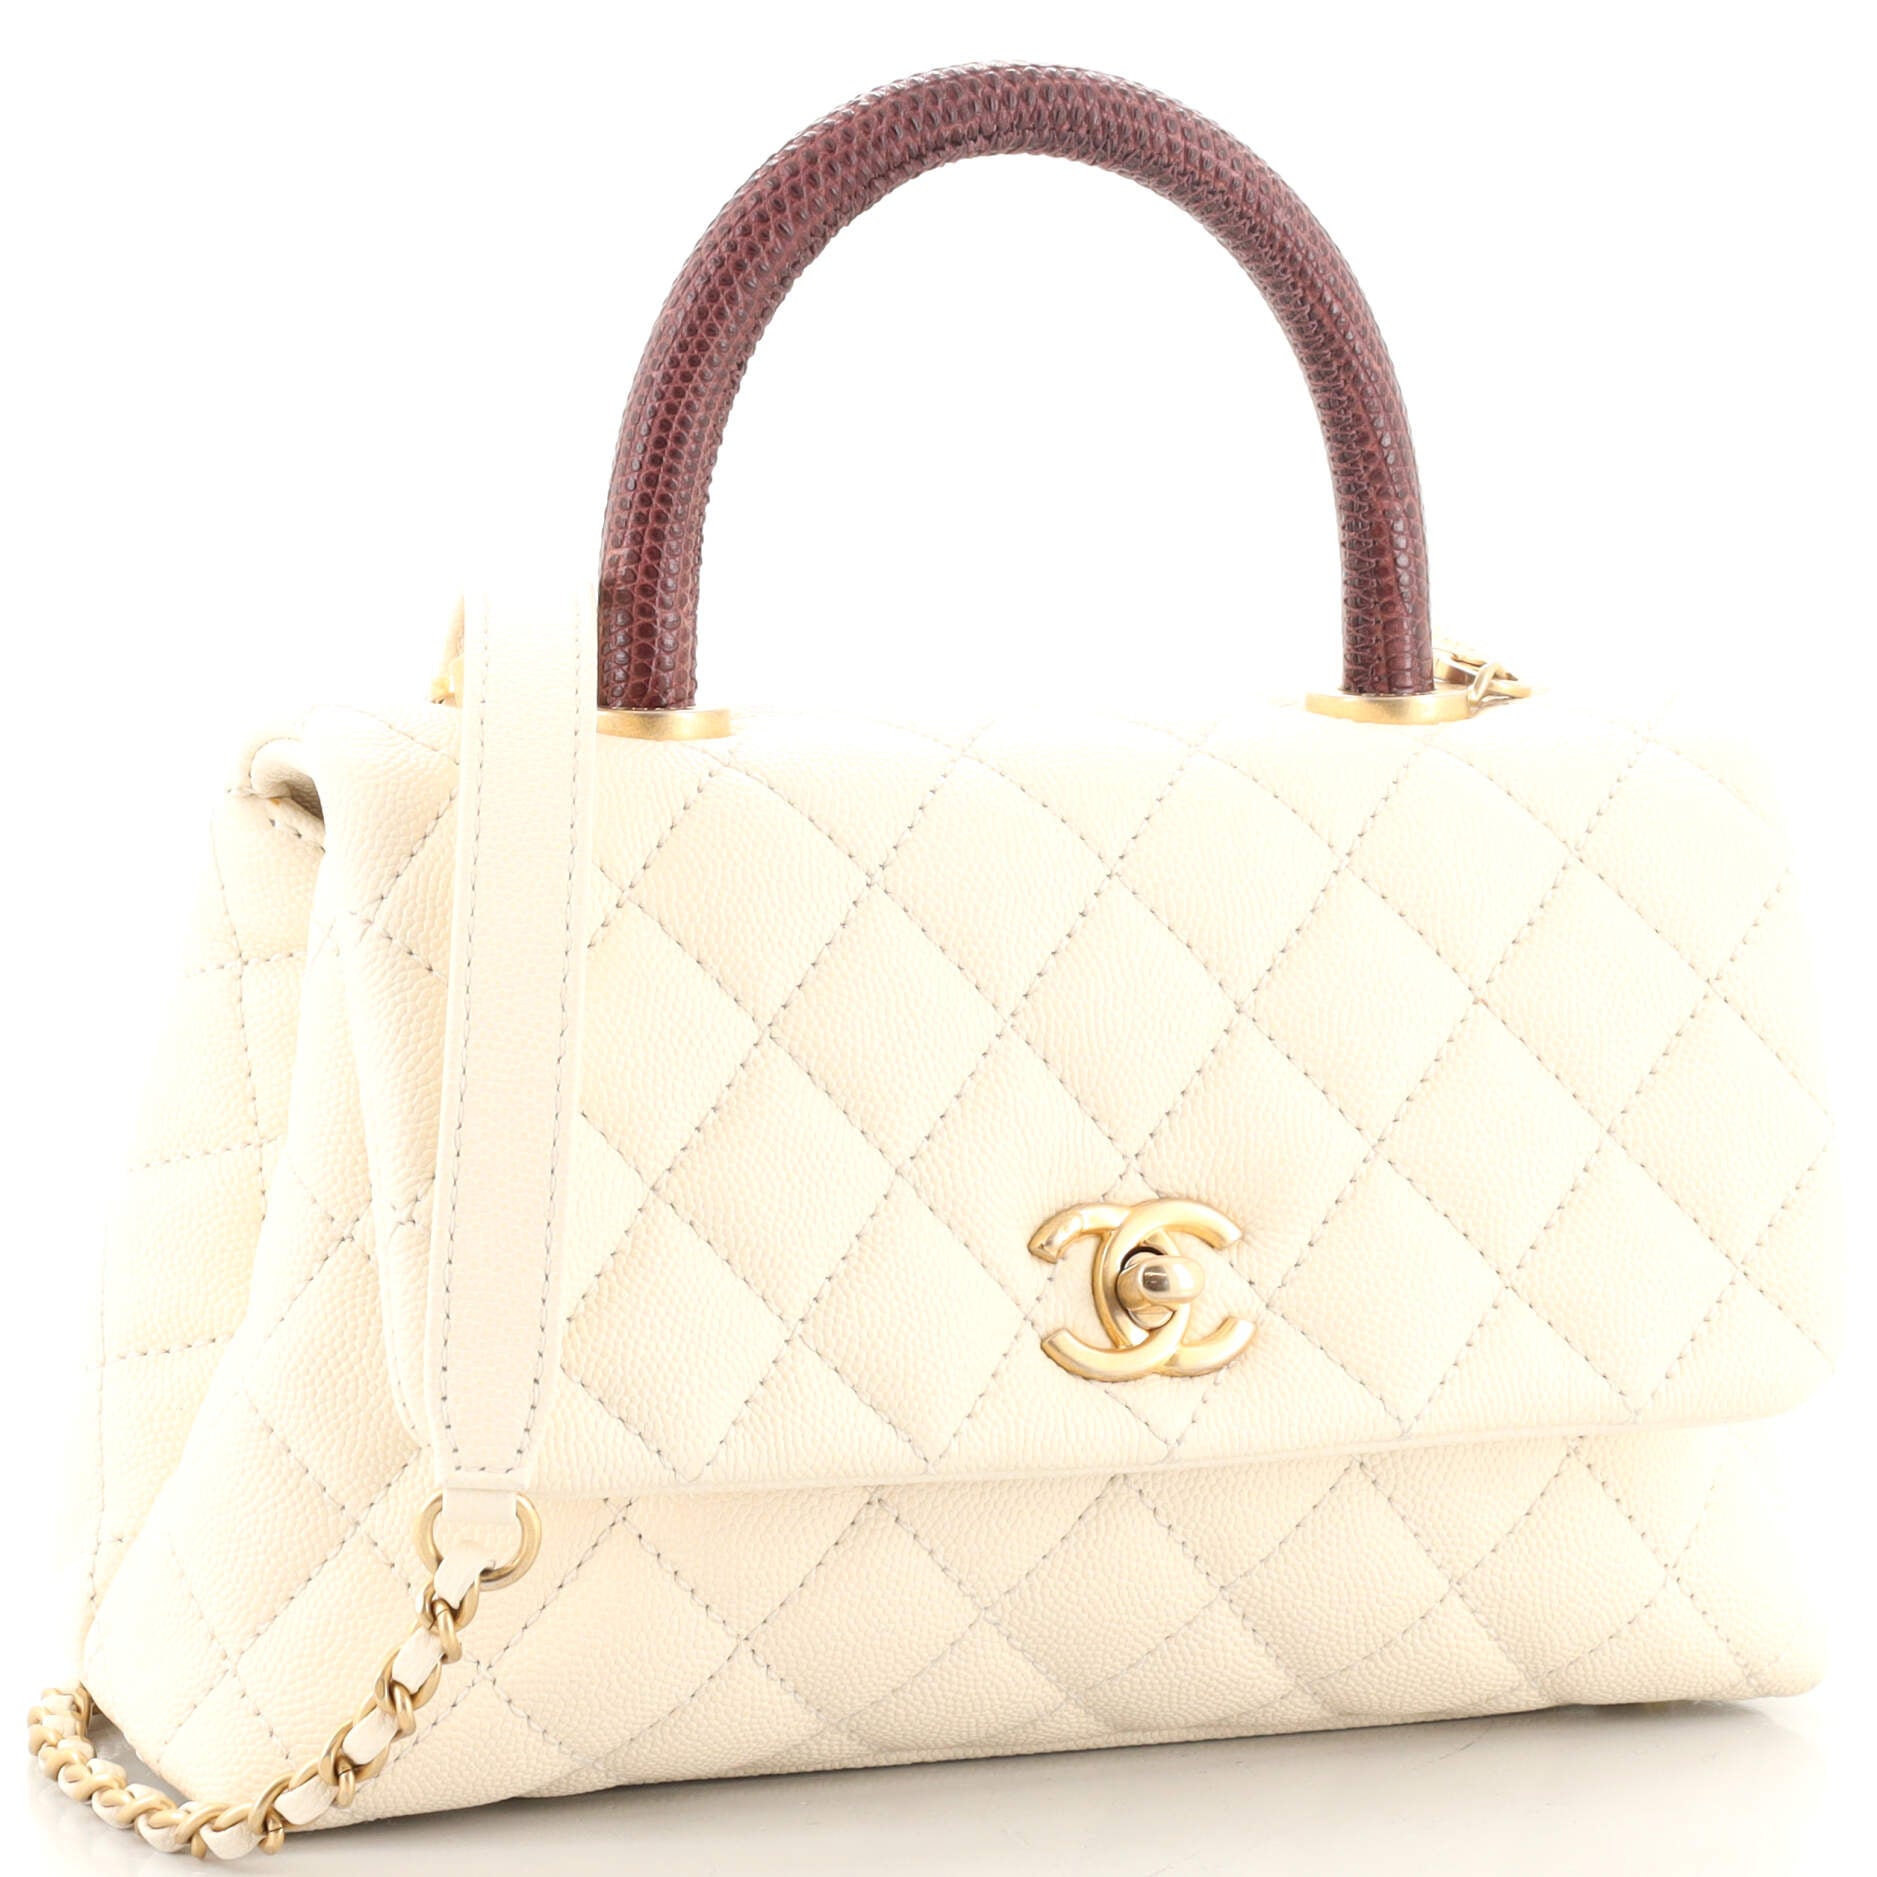 used chanel bags ebay